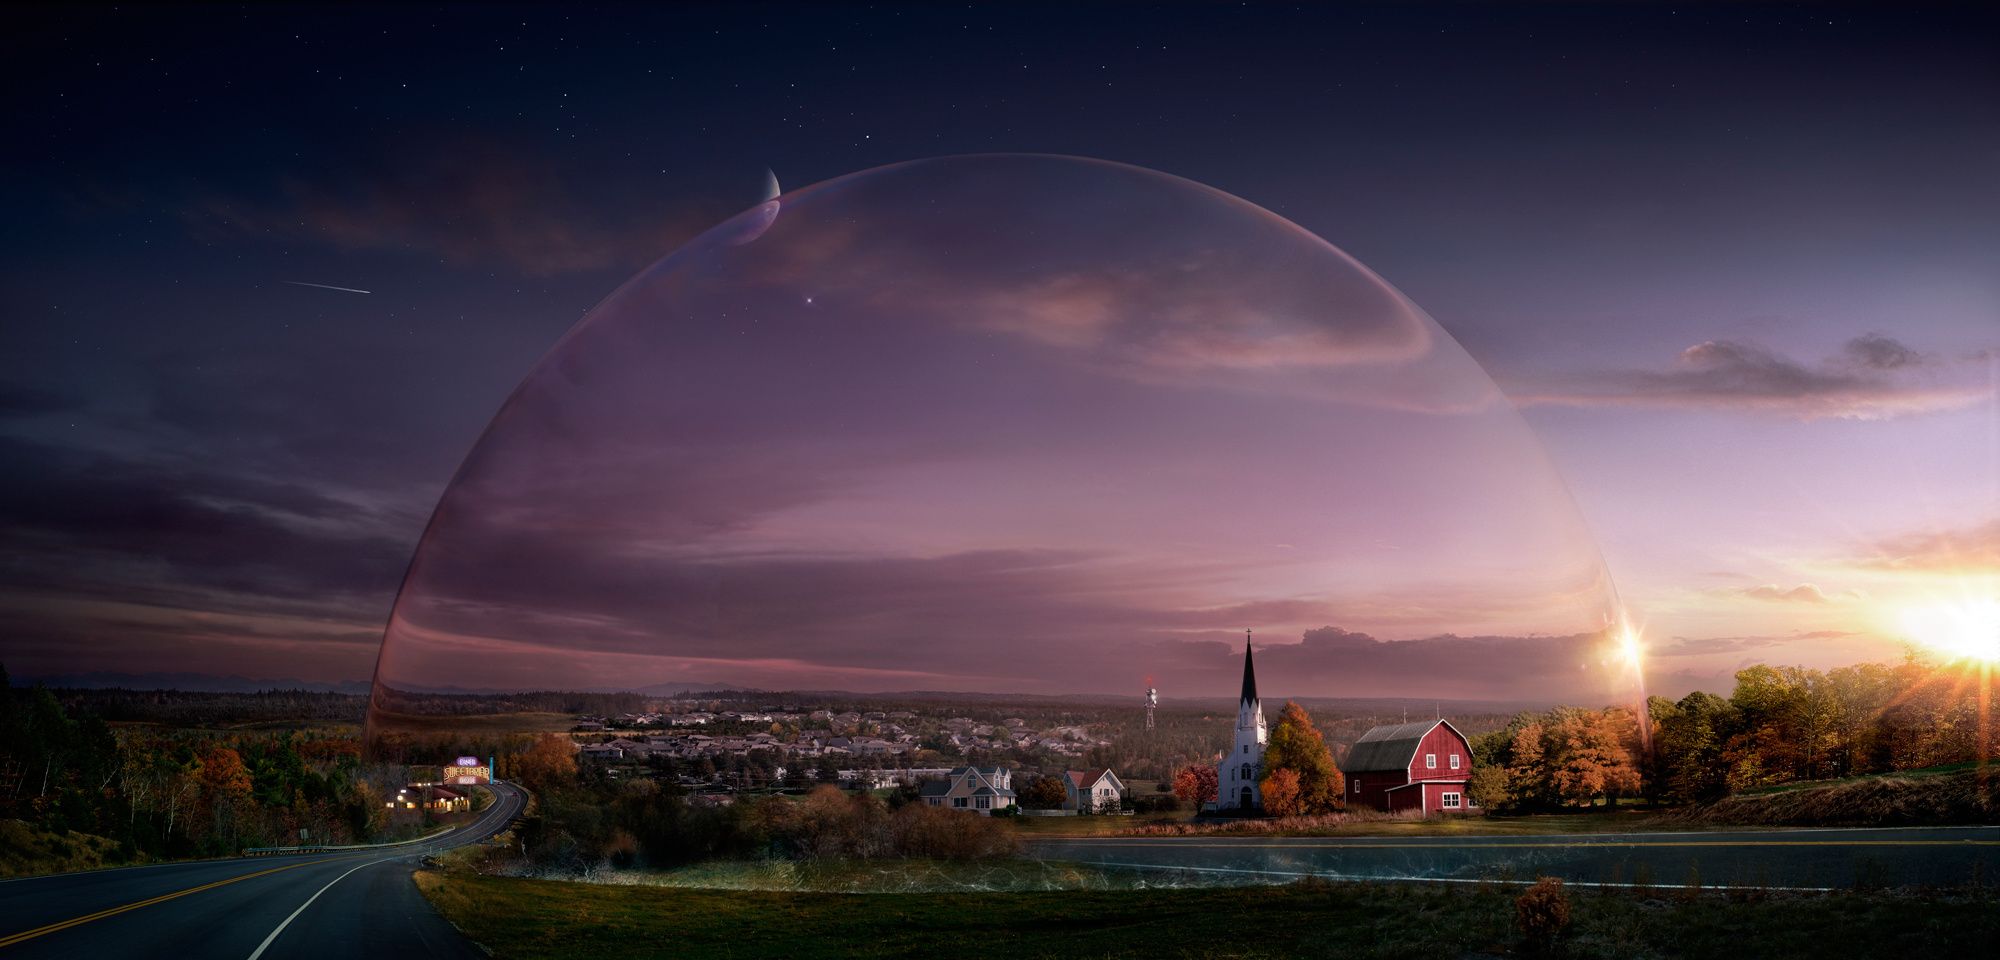 Under The Dome key art showing a dome over a small New England town